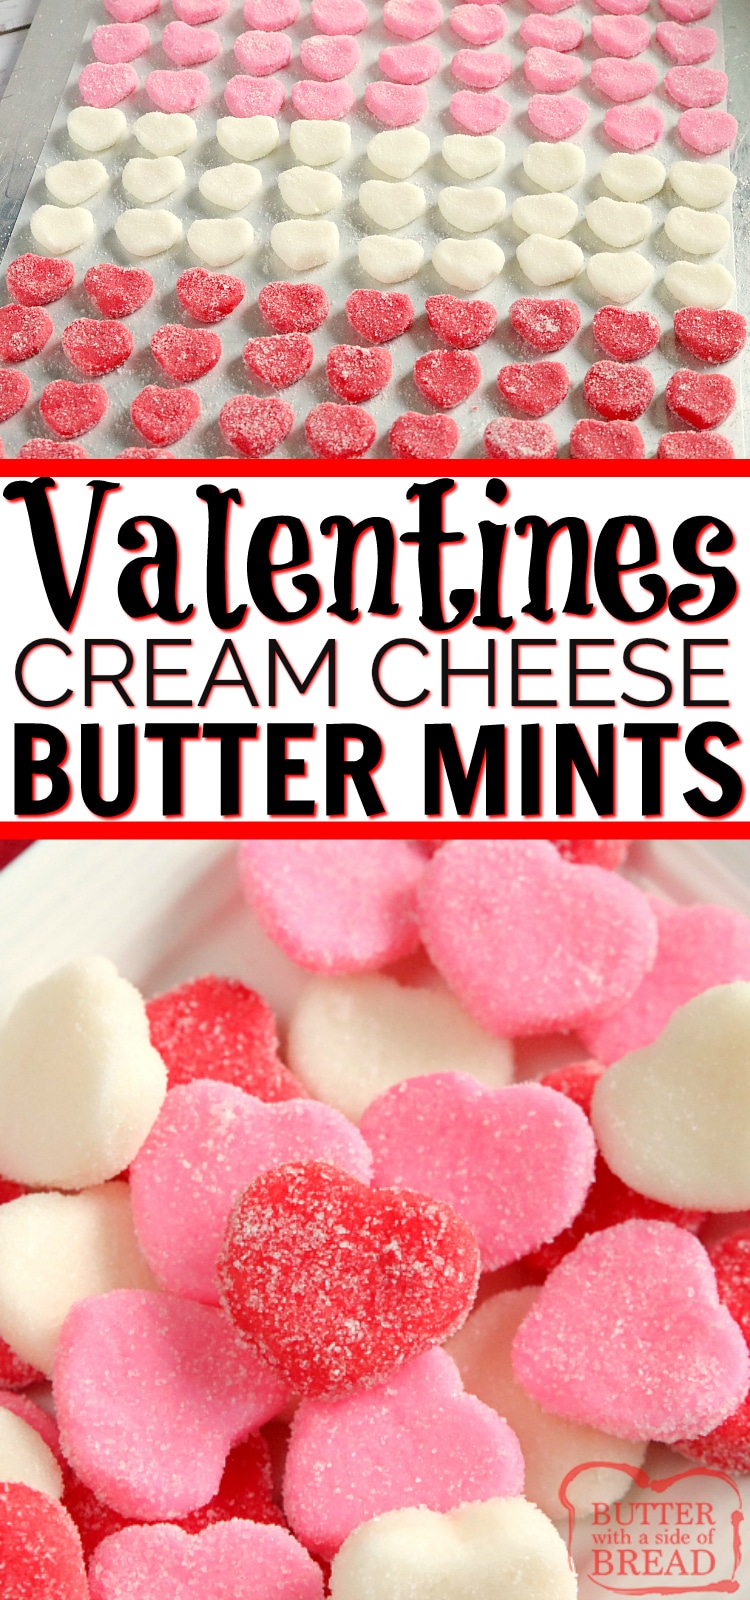 Valentines Cream Cheese Butter Mints are a fun no-bake Valentines Day treat that are easy to make and they are just so cute too! Only three ingredients, plus any coloring or flavoring you want!